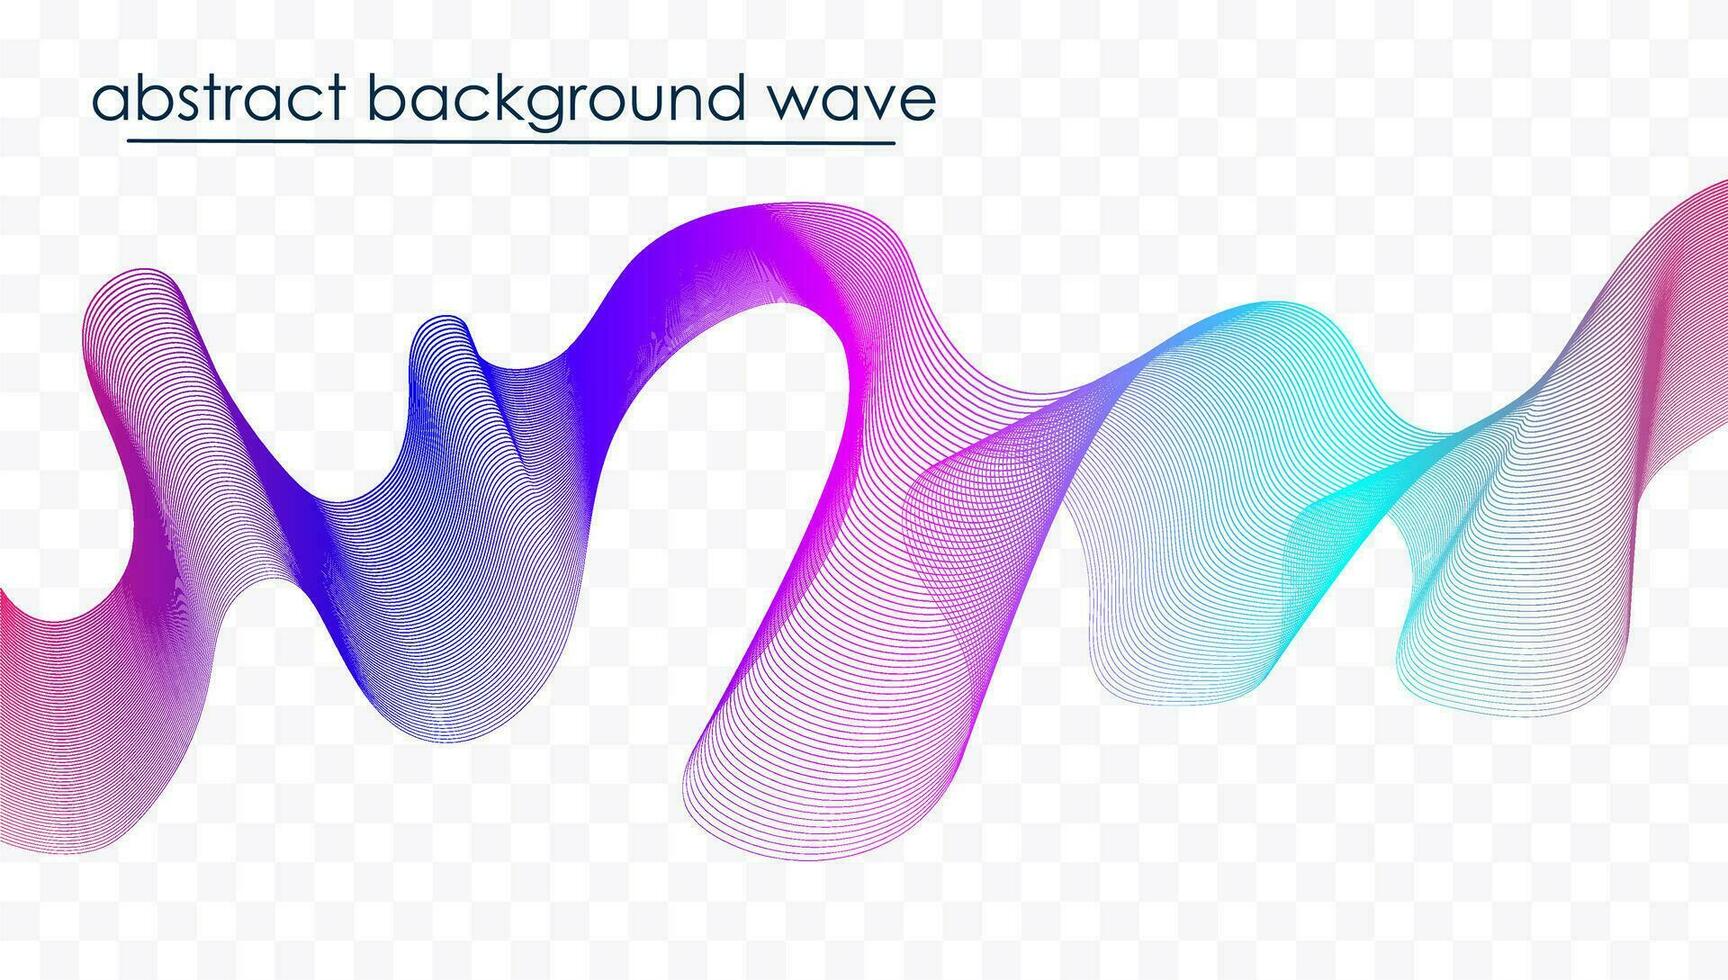 Abstract wave element for design. Digital frequency track equalizer. Stylized line art background. Vector illustration. Wave with dots created using blend tool. Curved wavy line, smooth stripe